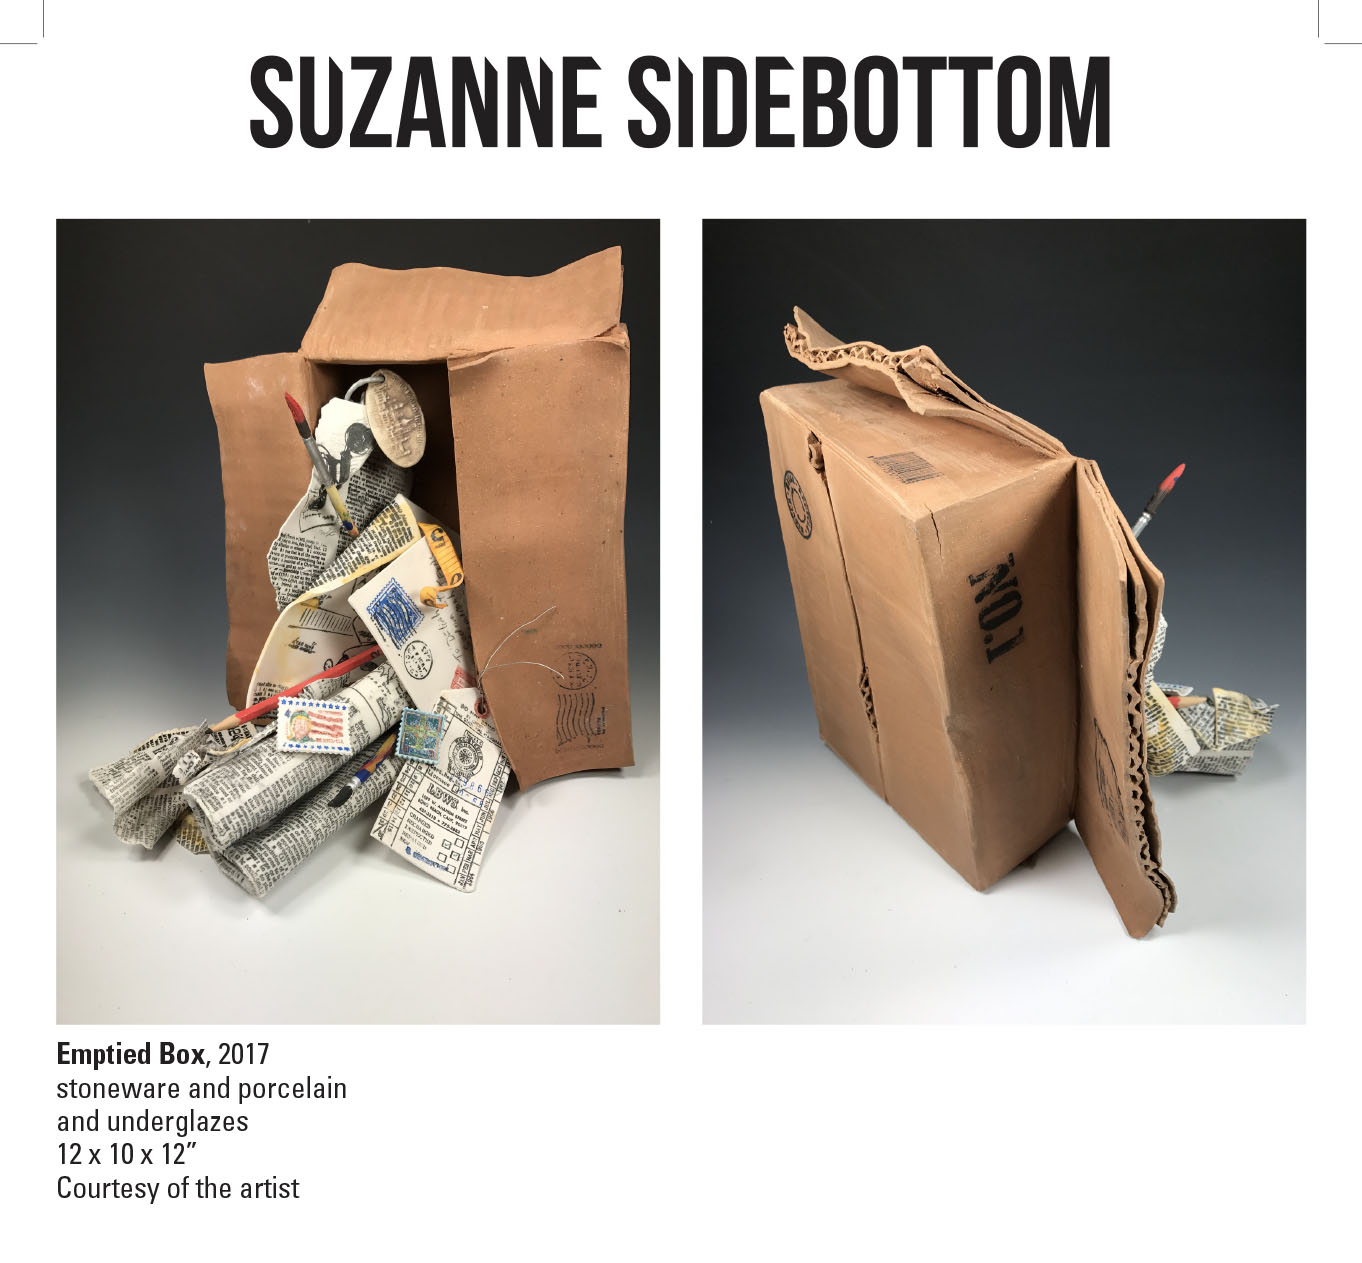 Suzanne Sidebottom, Emptied Box, 2017. Stoneware and porcelain and underglazes. 12 x 10 x 12” Courtesy of the artist. A sculpture of a box with various papers coming out of it. Suzanne Sidebottom, Emptied Box, 2017. Stoneware and porcelain and underglazes. 12 x 10 x 12” Courtesy of the artist.